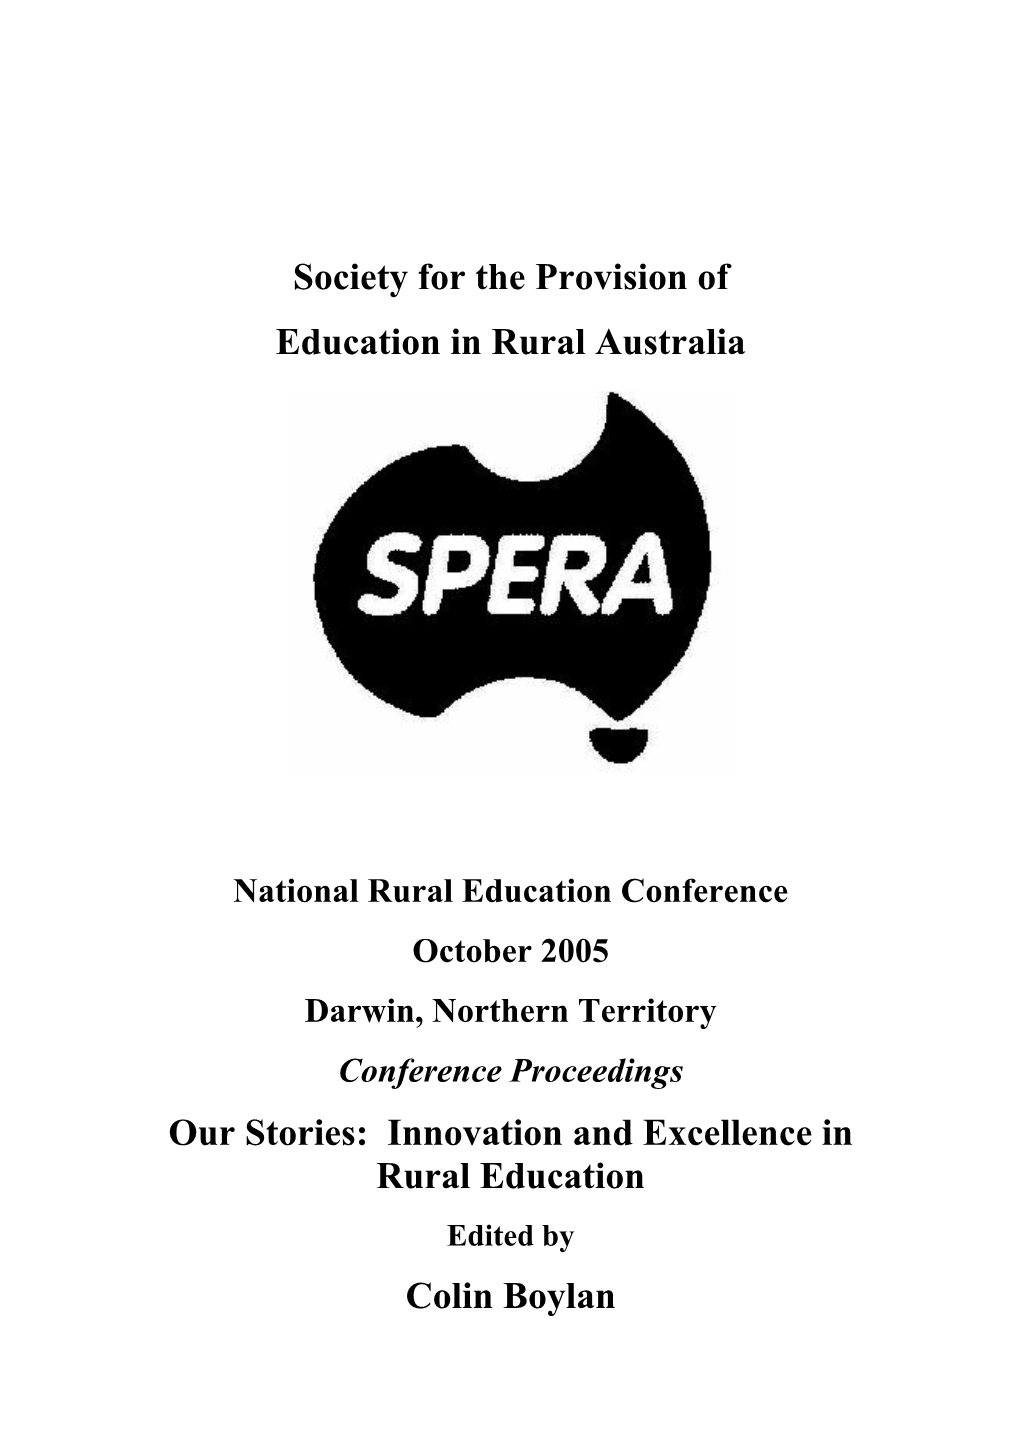 Society for the Provision of Education in Rural Australia Our Stories